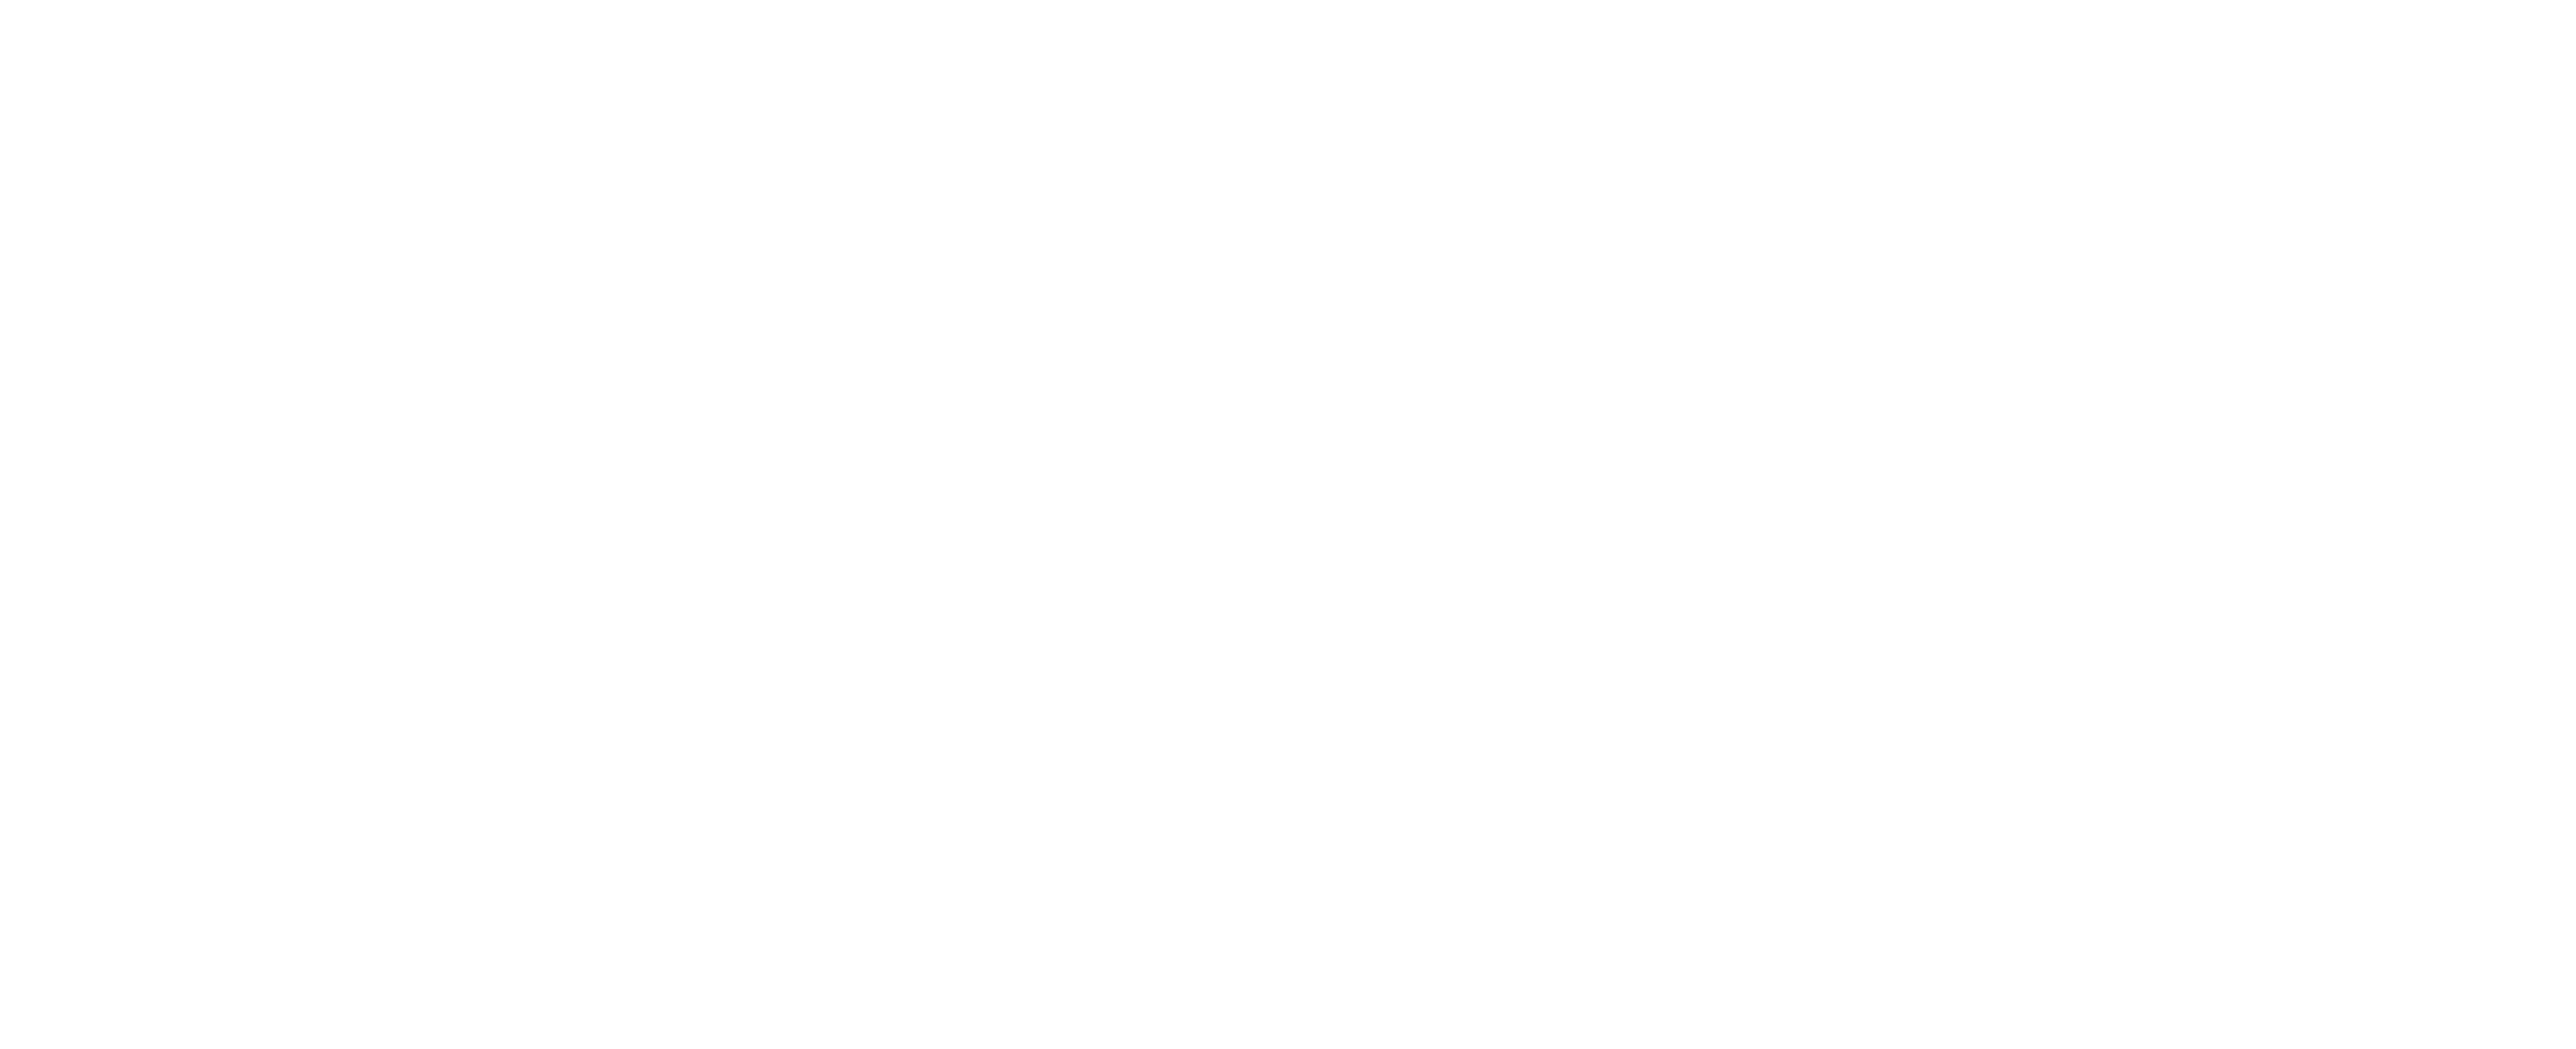 Maxwell's Tae Kwon Do